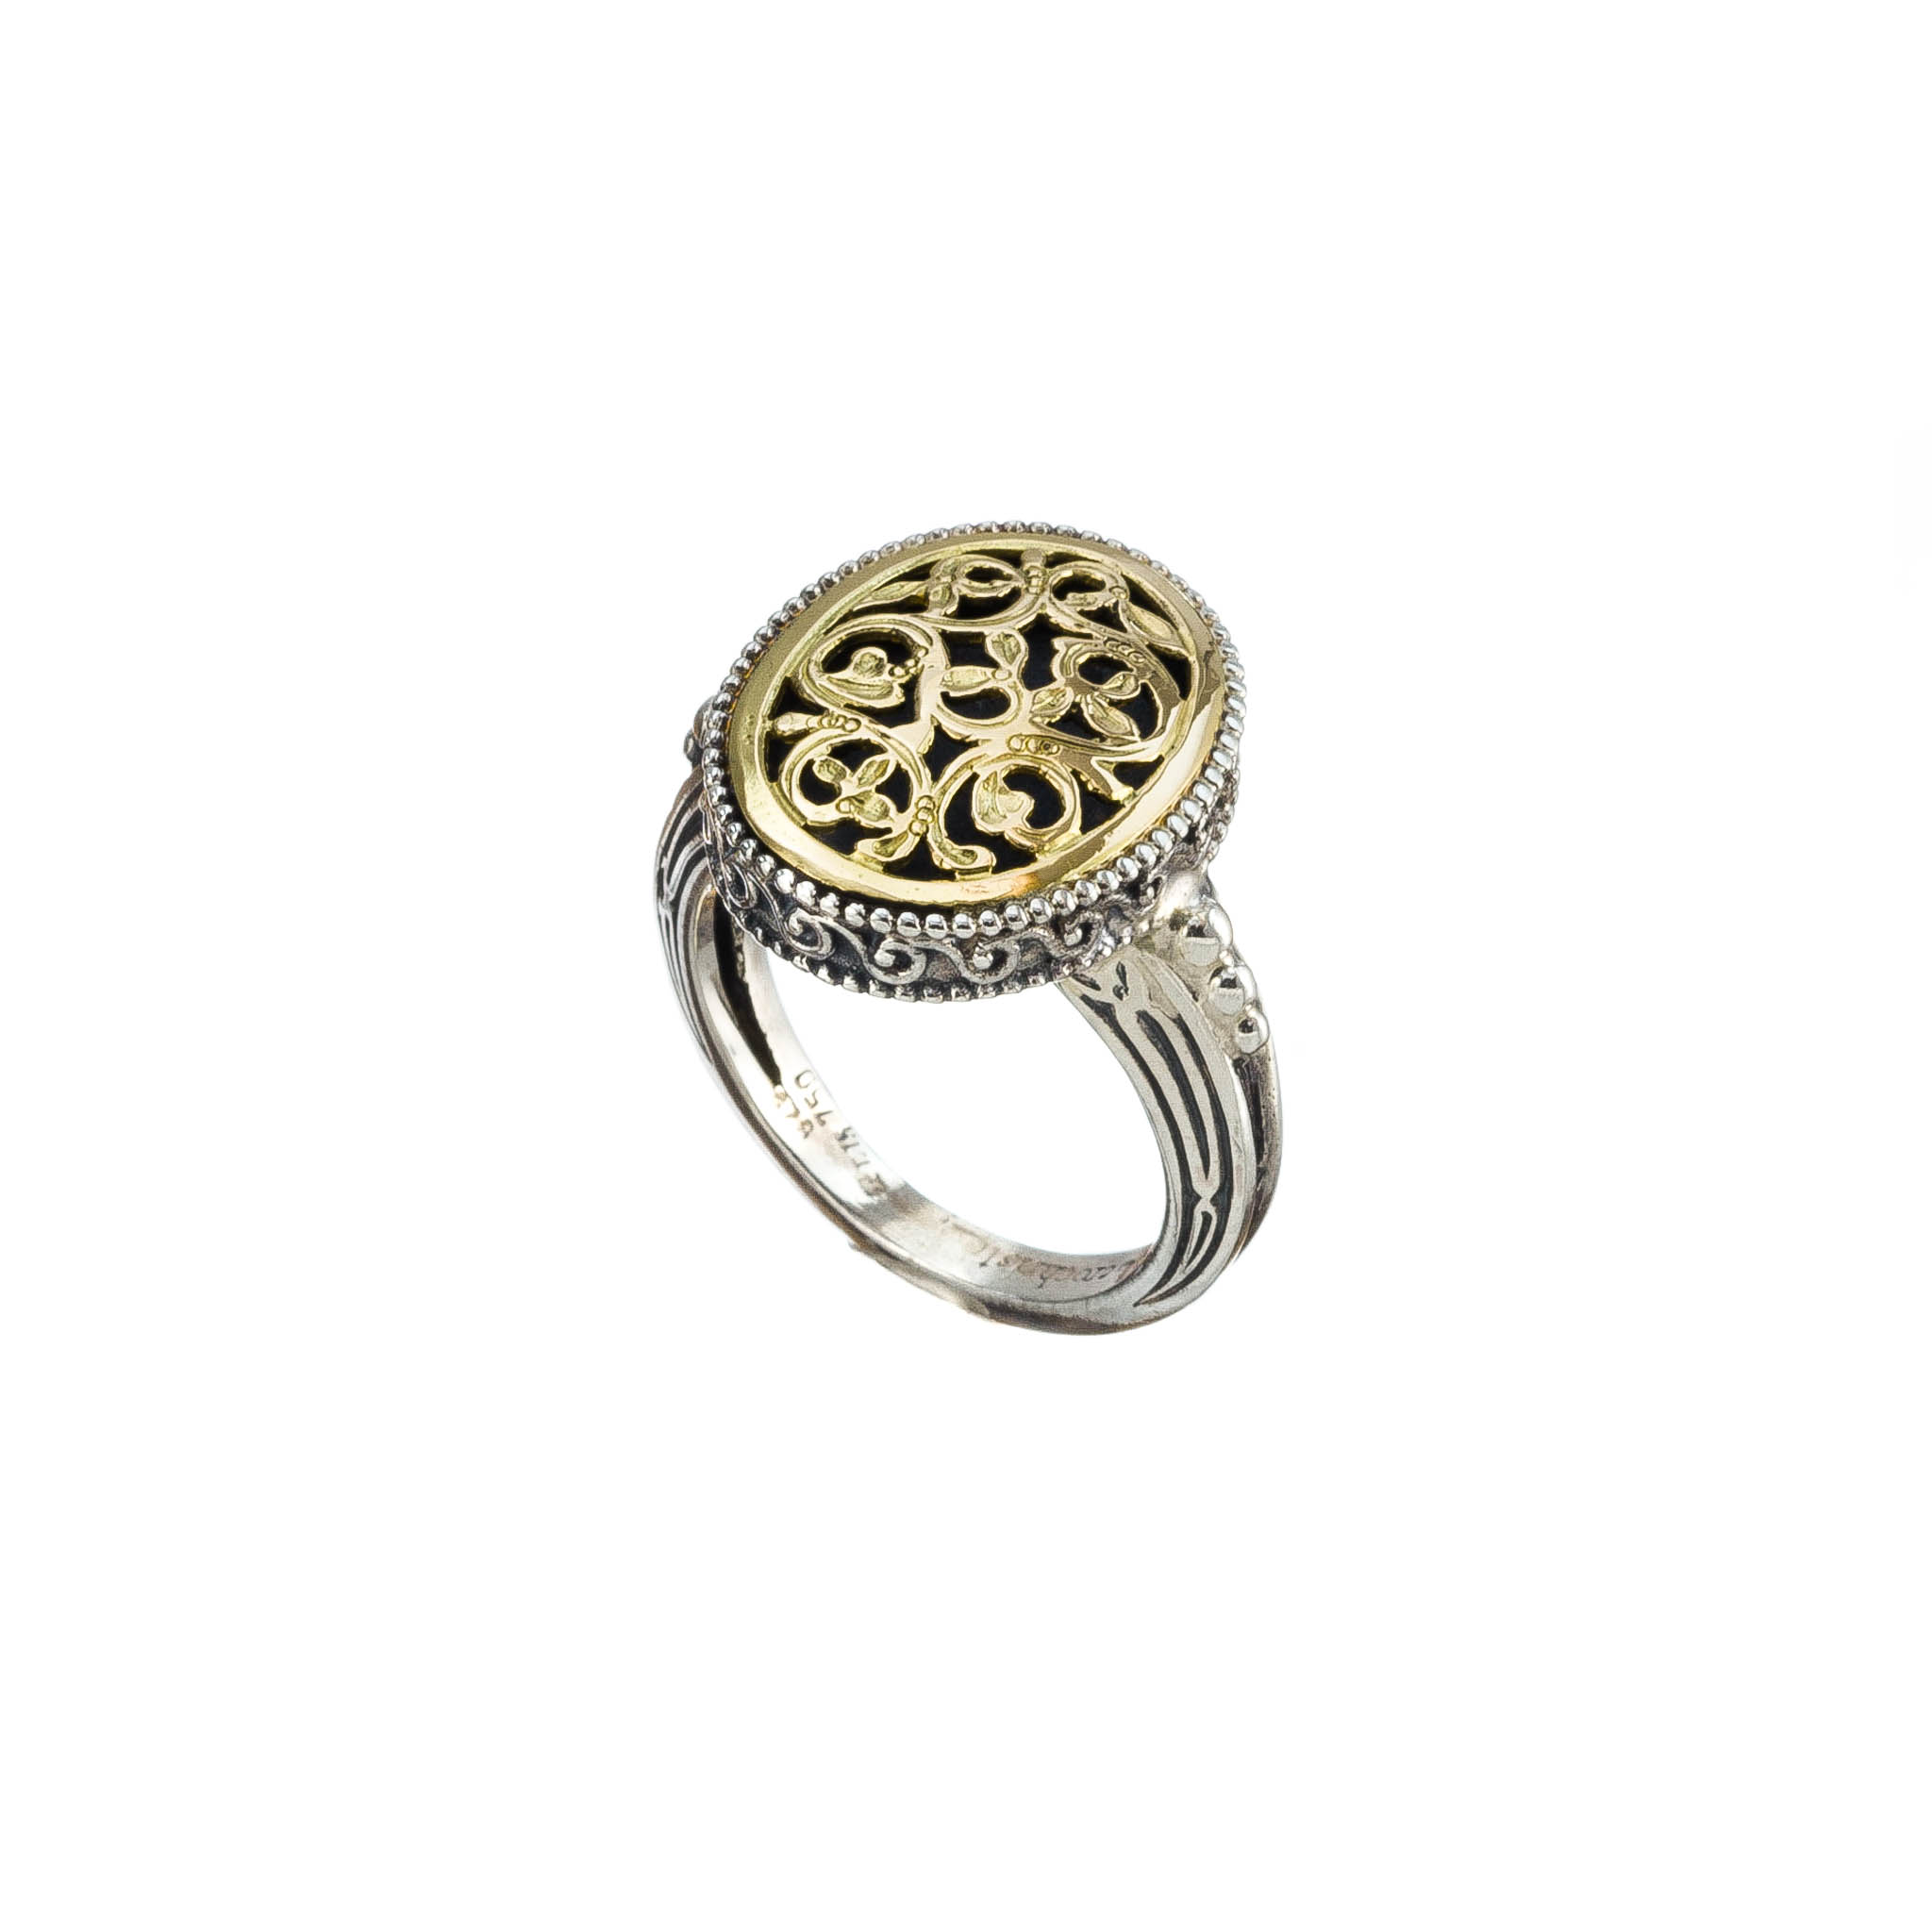 Garden shadows medium oval ring in 18K Gold and Sterling Silver